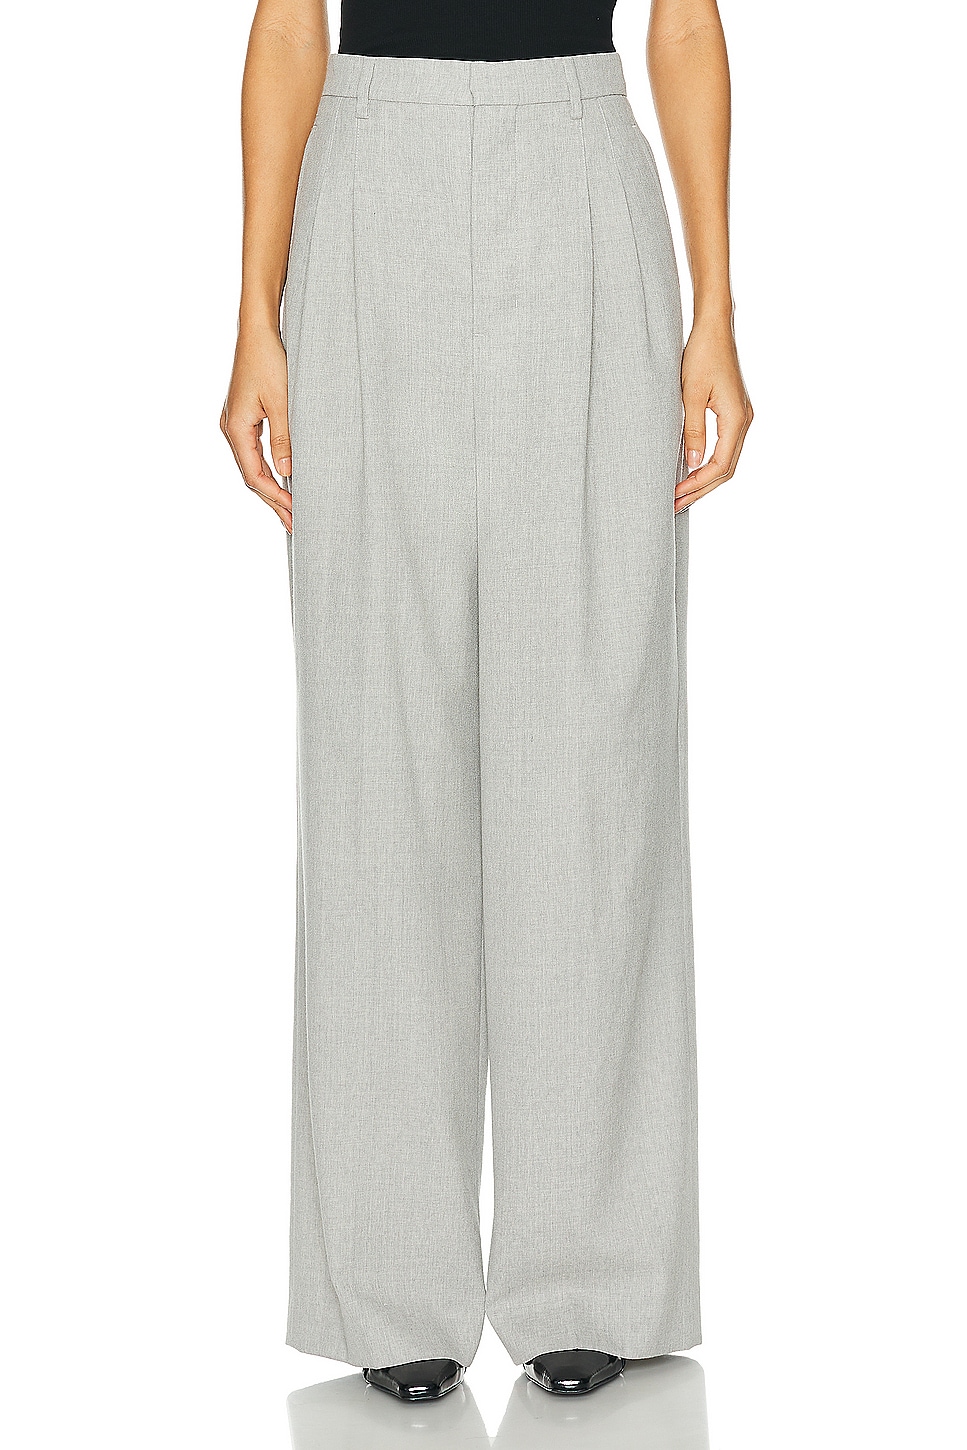 Image 1 of ami High Waist Large Trouser in Light Heather Grey